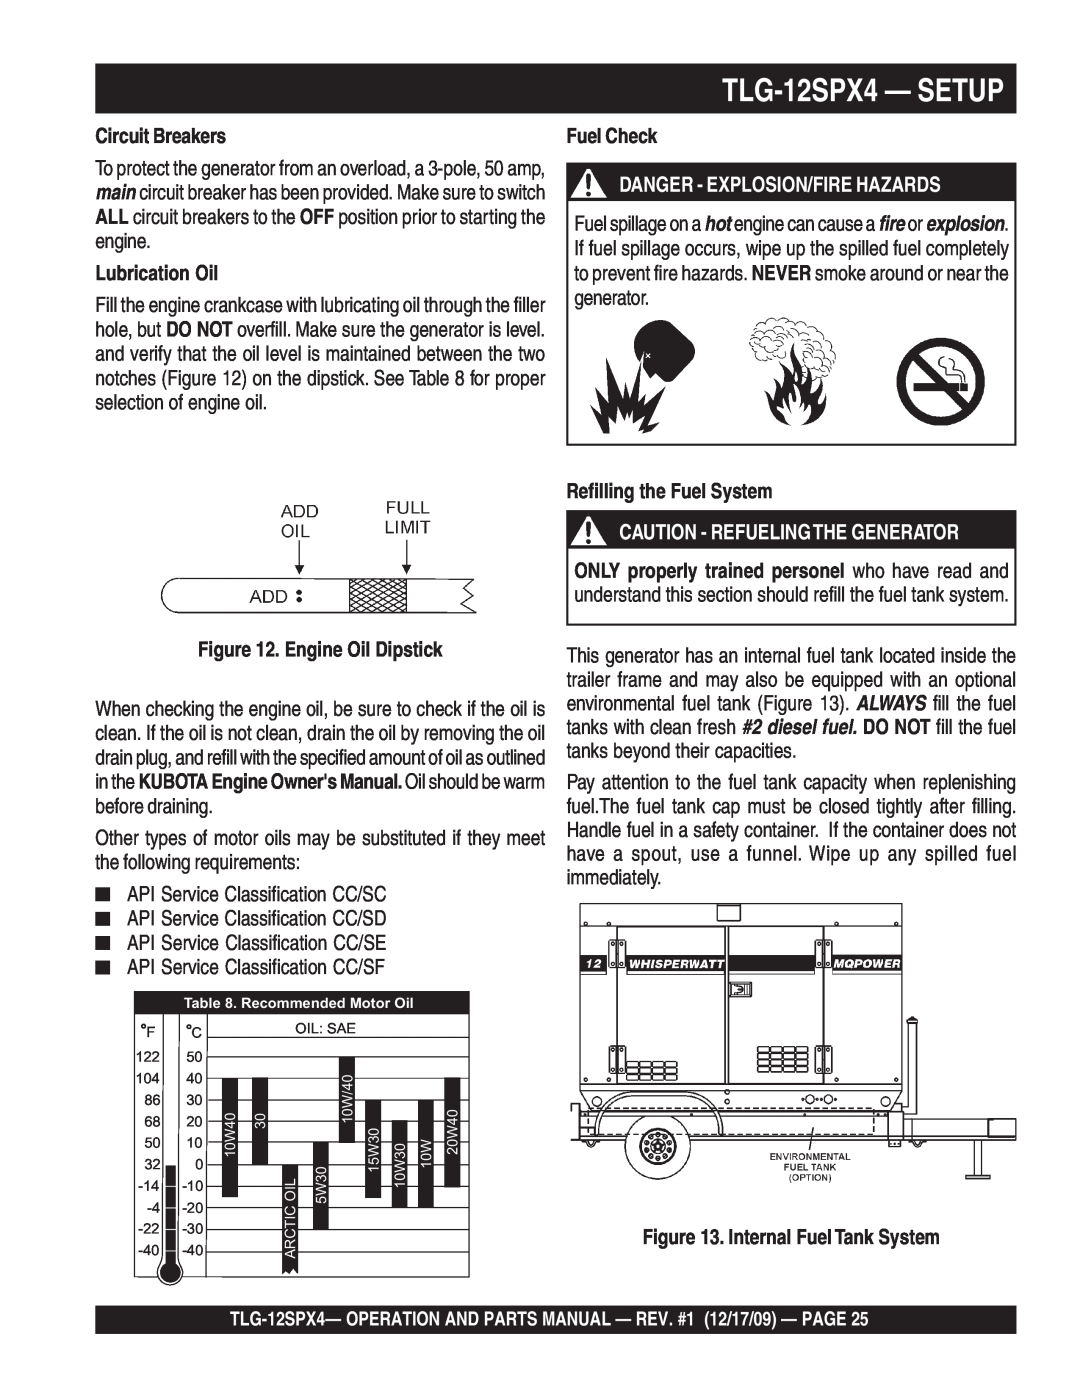 Multiquip operation manual TLG-12SPX4- SETUP, Circuit Breakers, Lubrication Oil, Engine Oil Dipstick, Fuel Check 